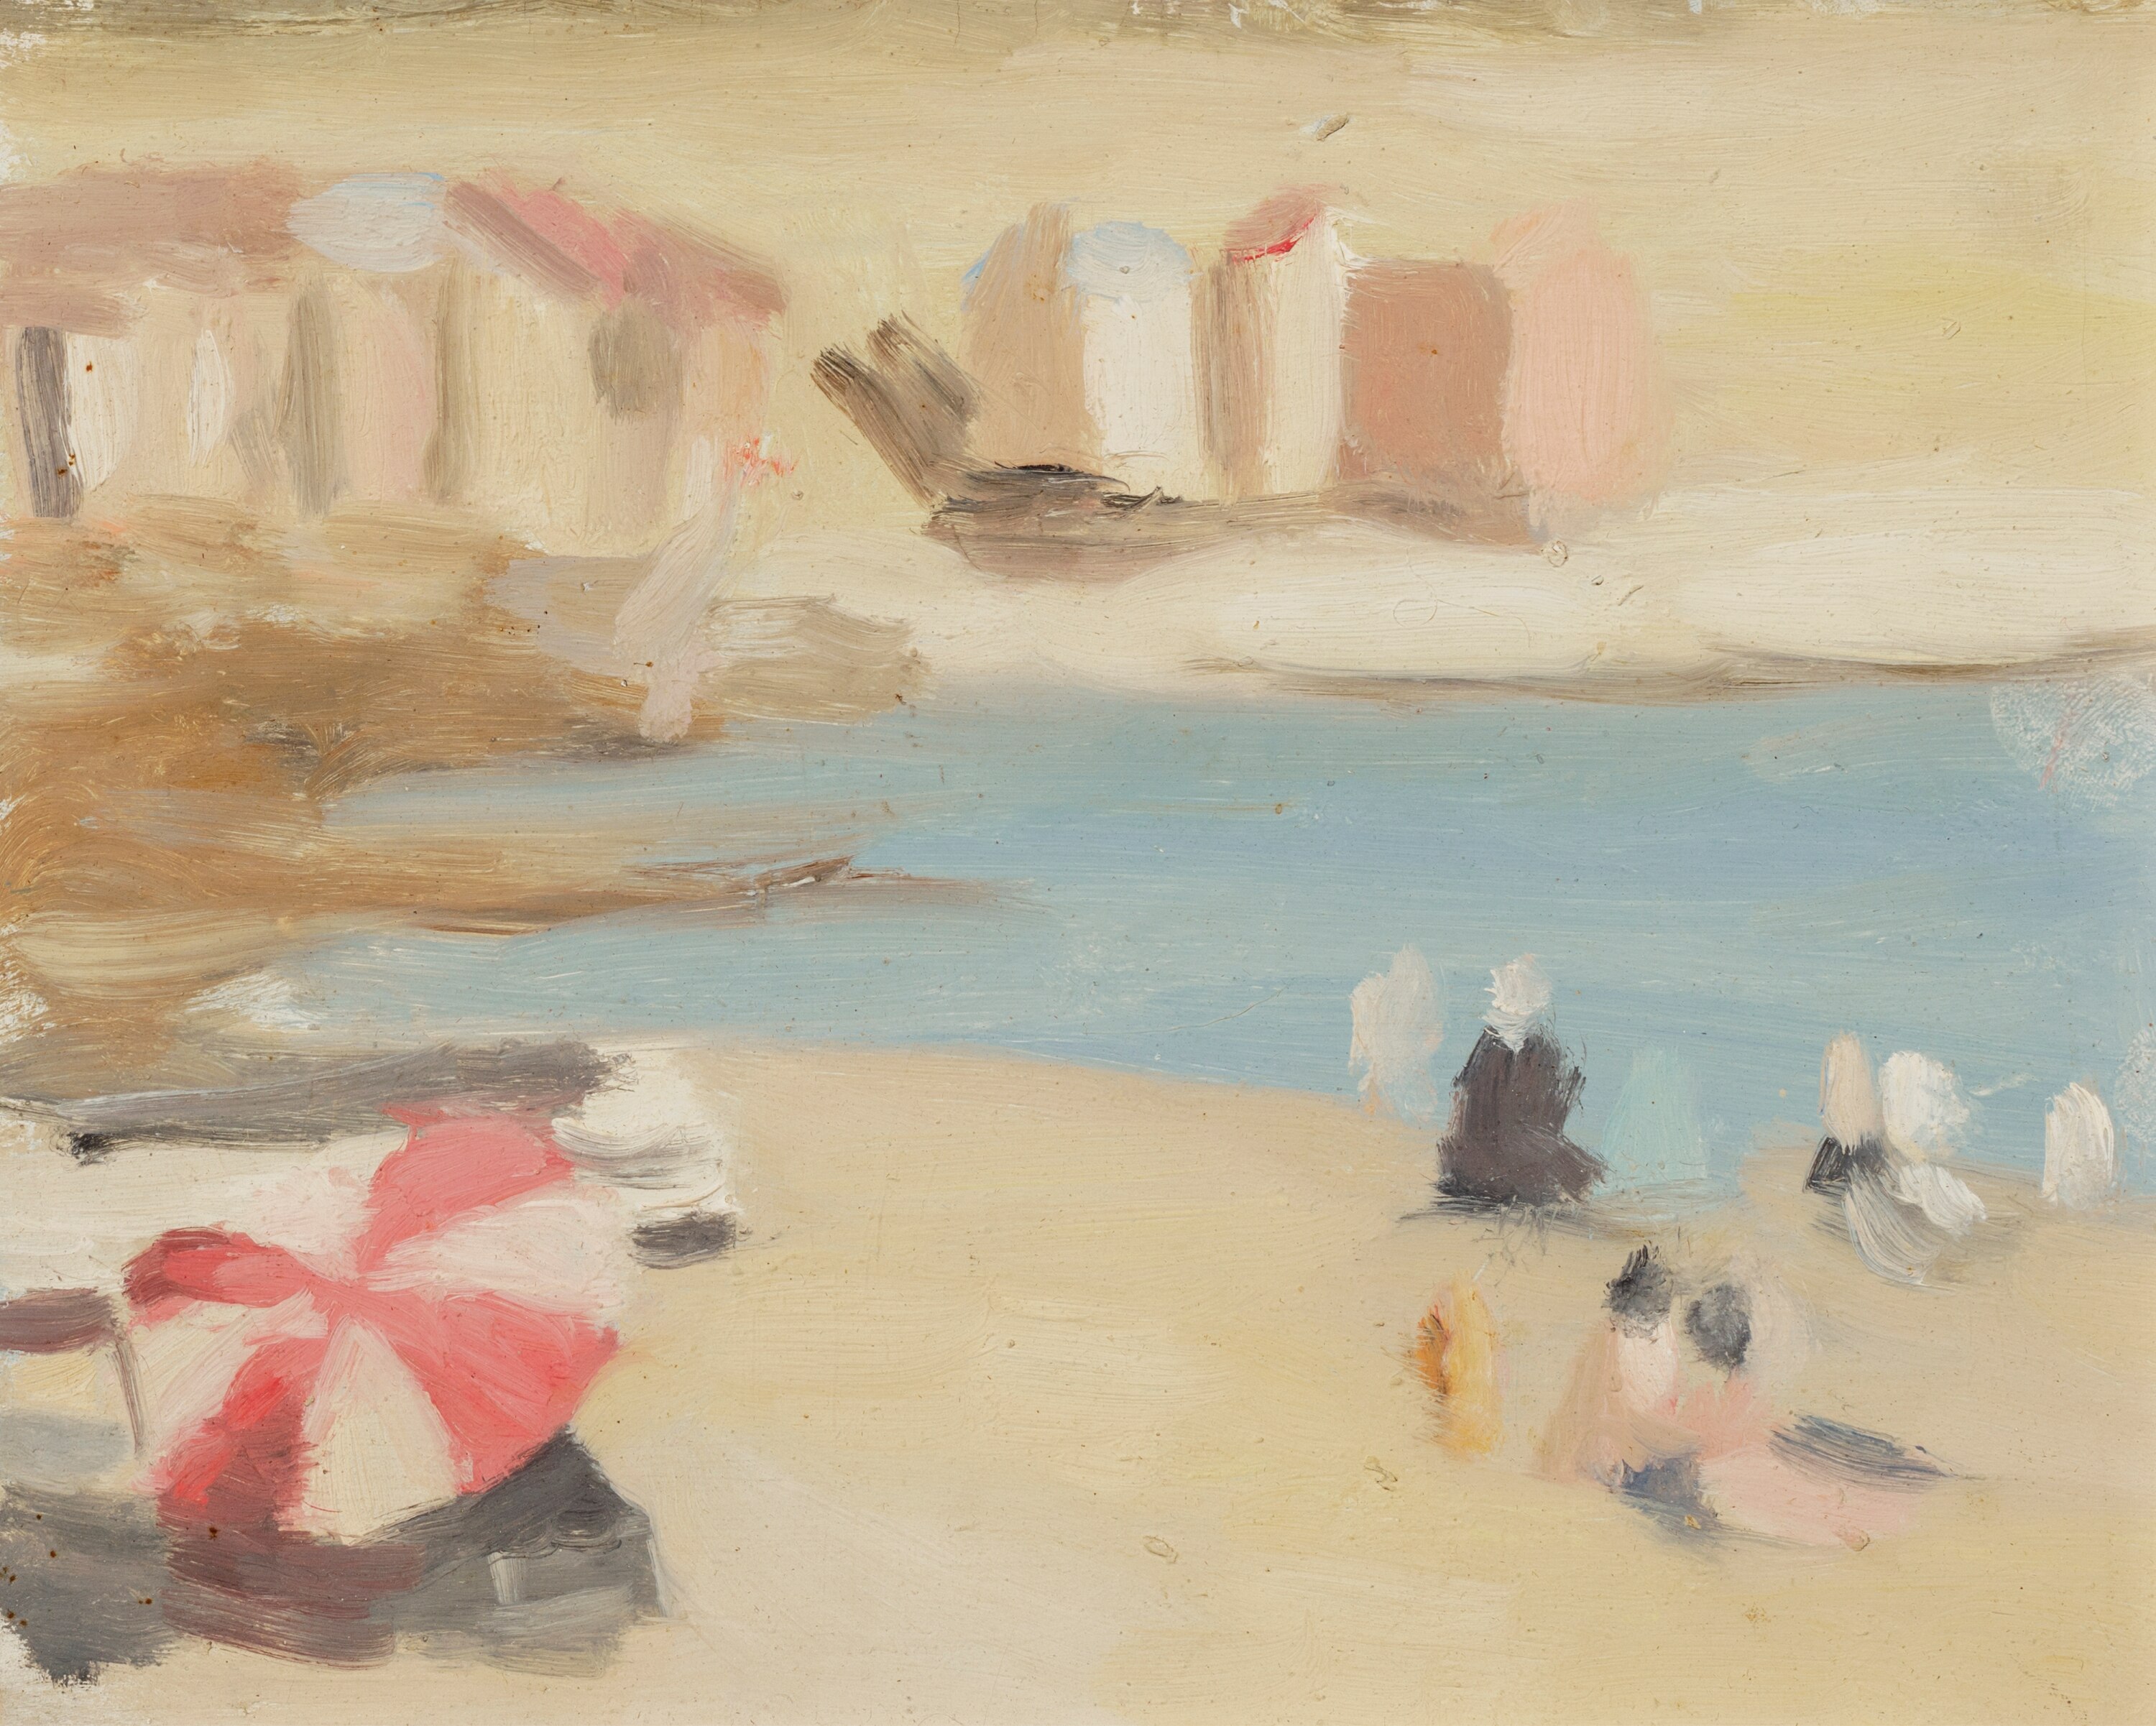 A painting by Clarice Beckett, blurry realism, of people and bathing boxes on Brighton Beach